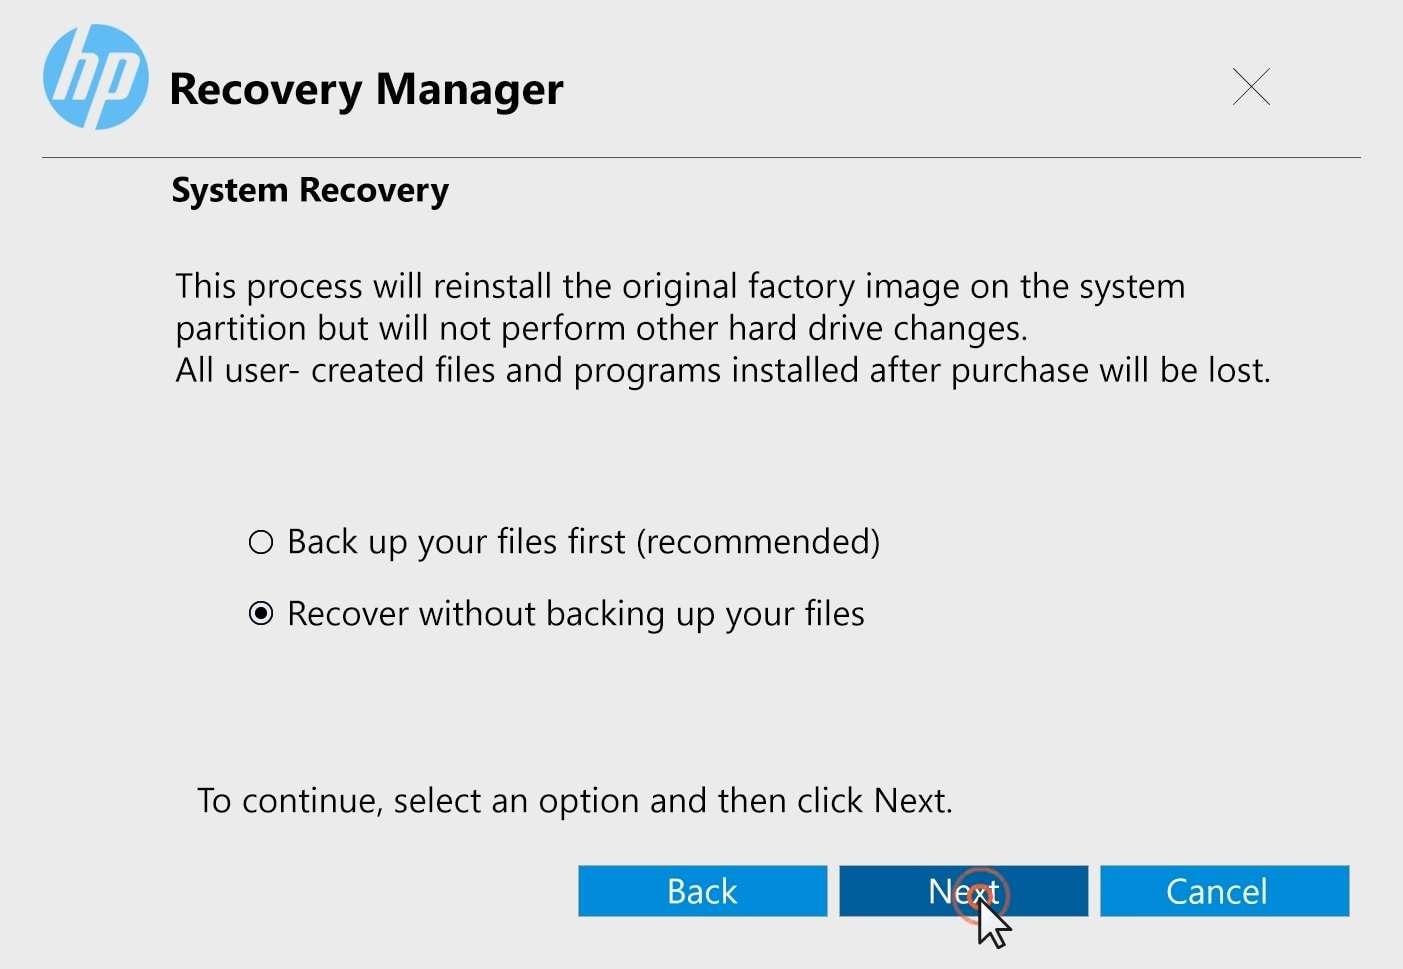 recover your system without a backup